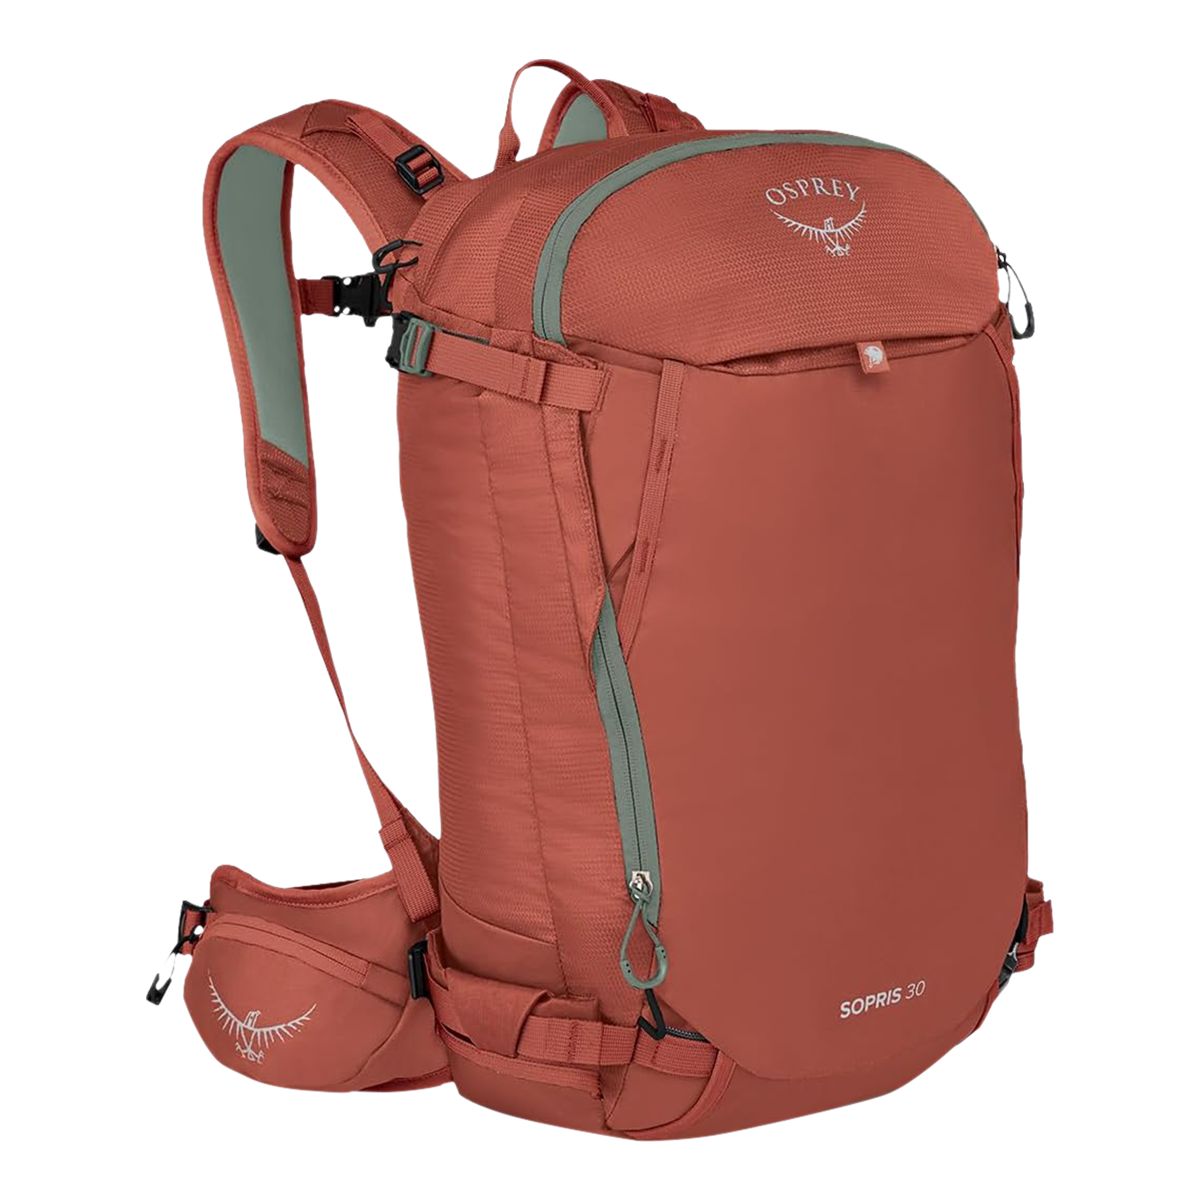 Image of Osprey Wmns Sopris 30 Touring Pack